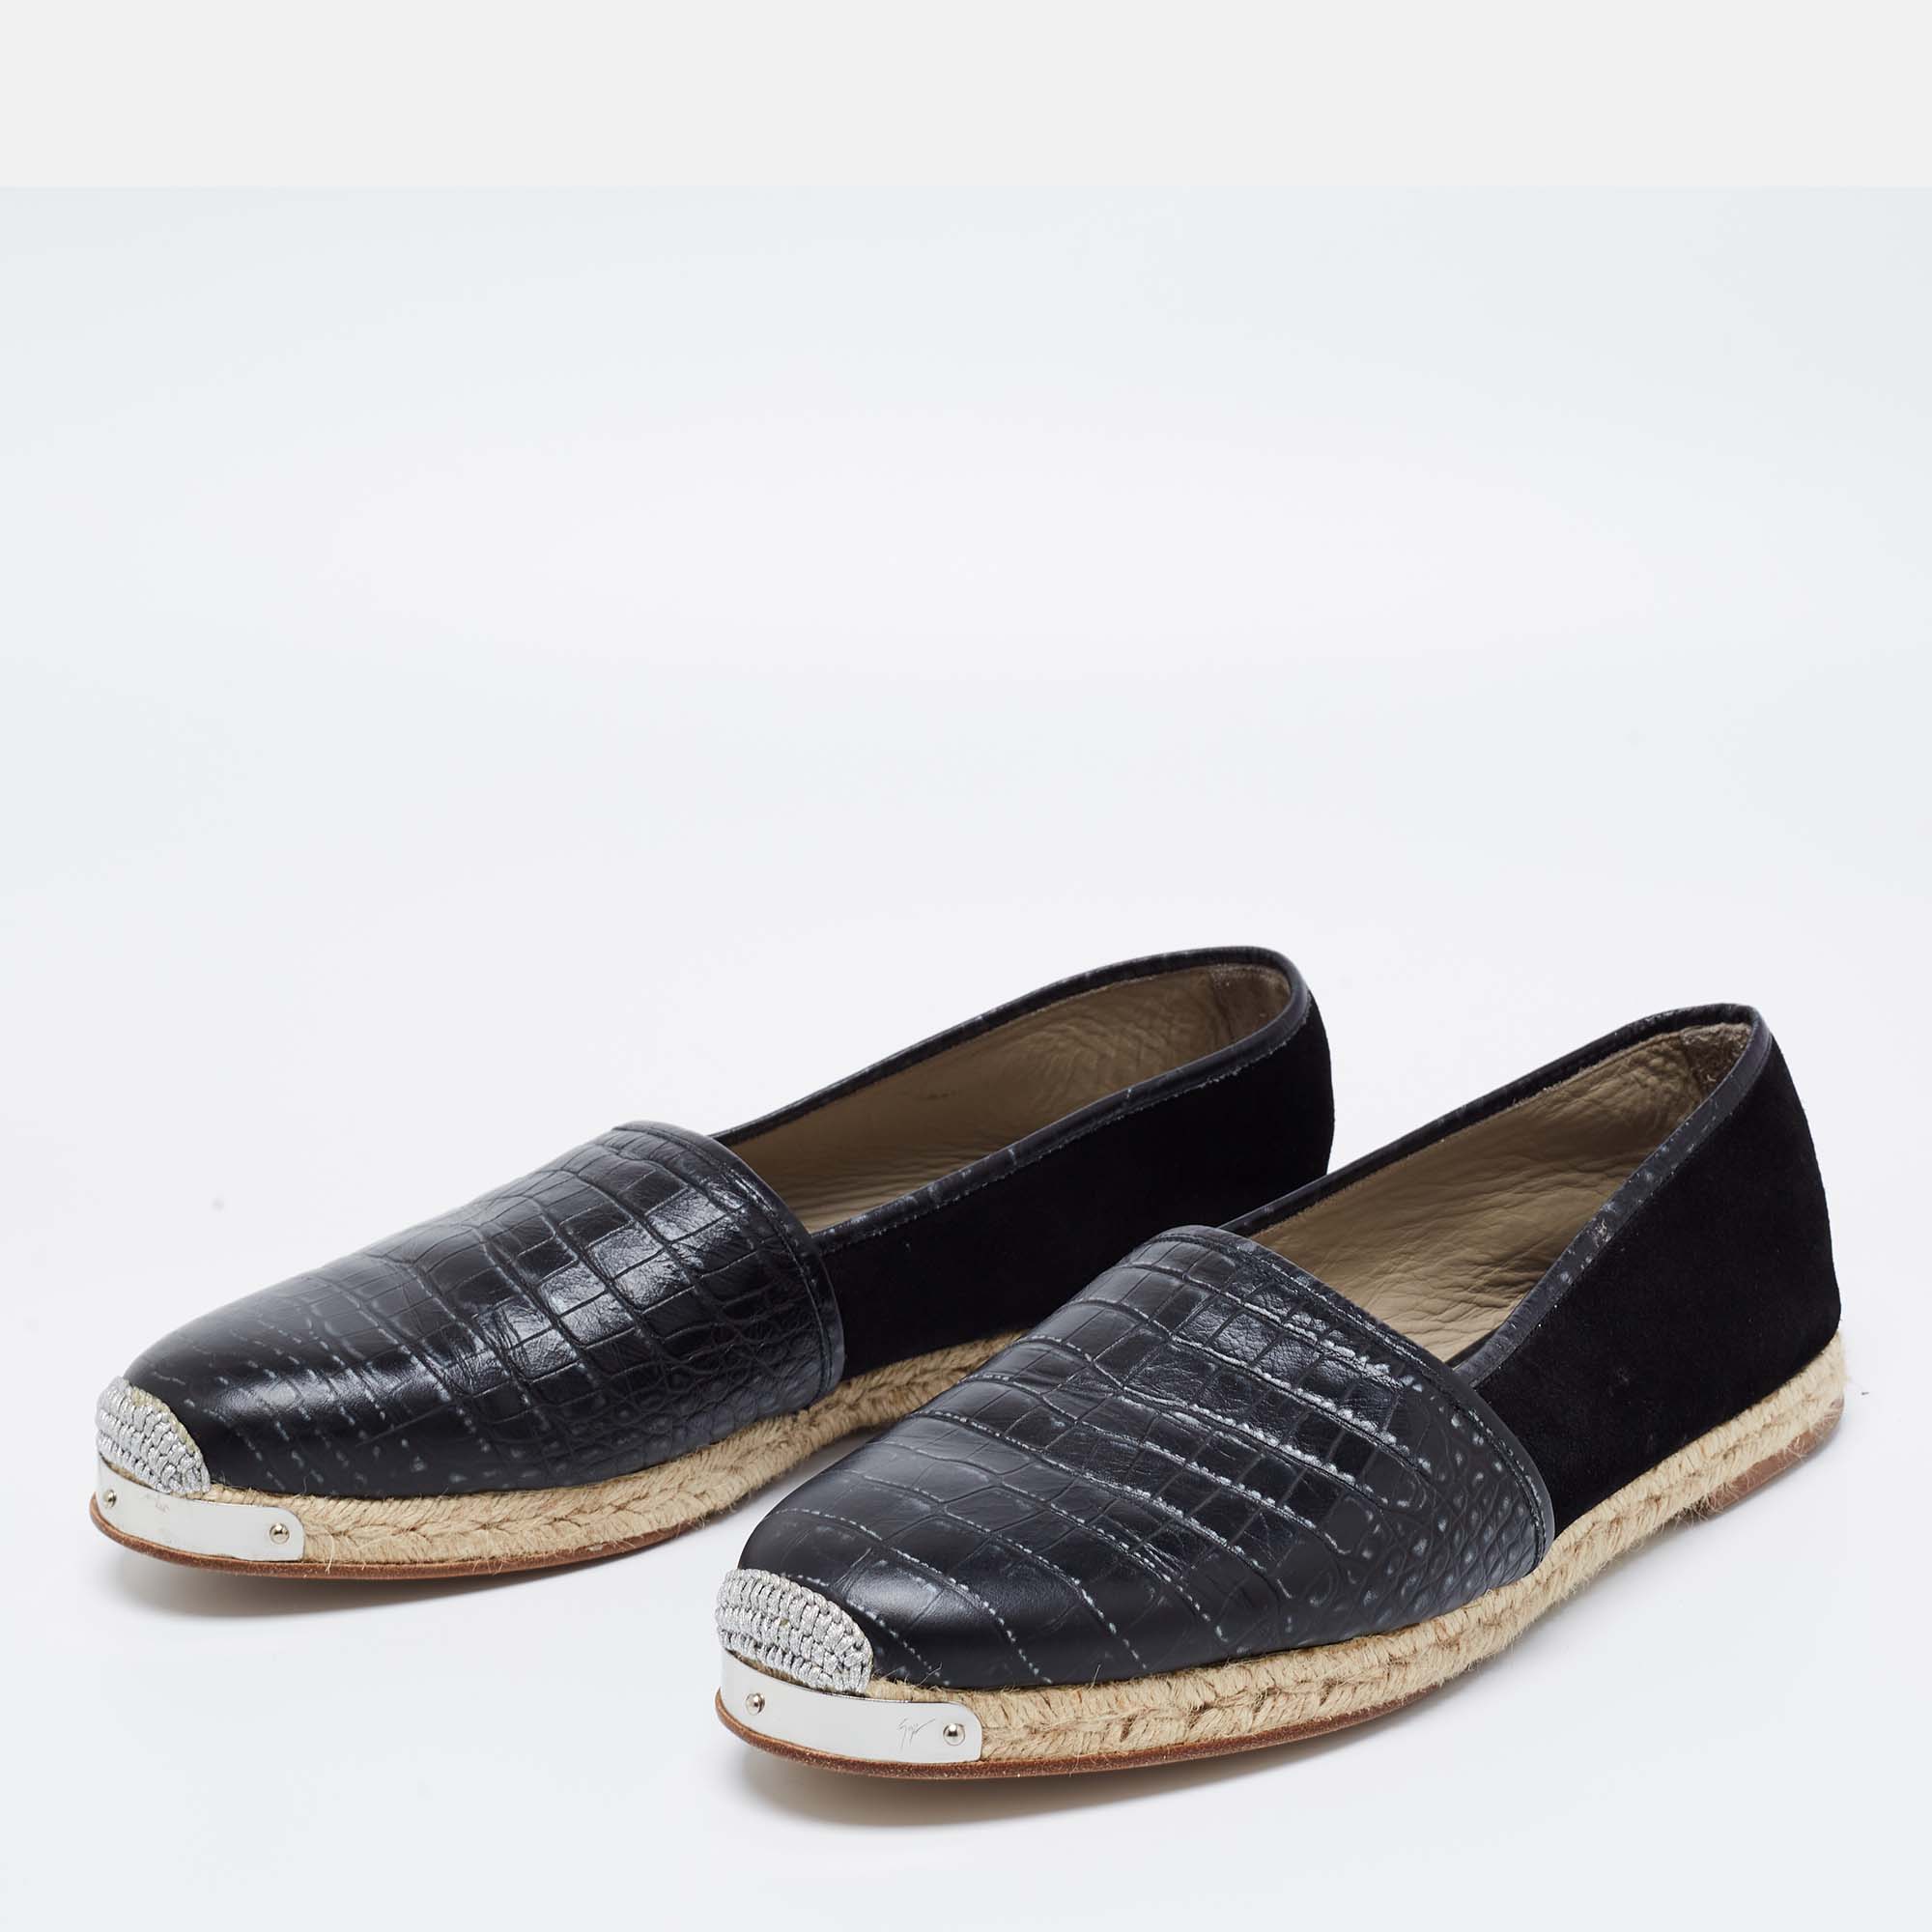 

Giuseppe Zanotti Black Croc Embossed Leather And Suede Espadrille Slip On Loafers Size